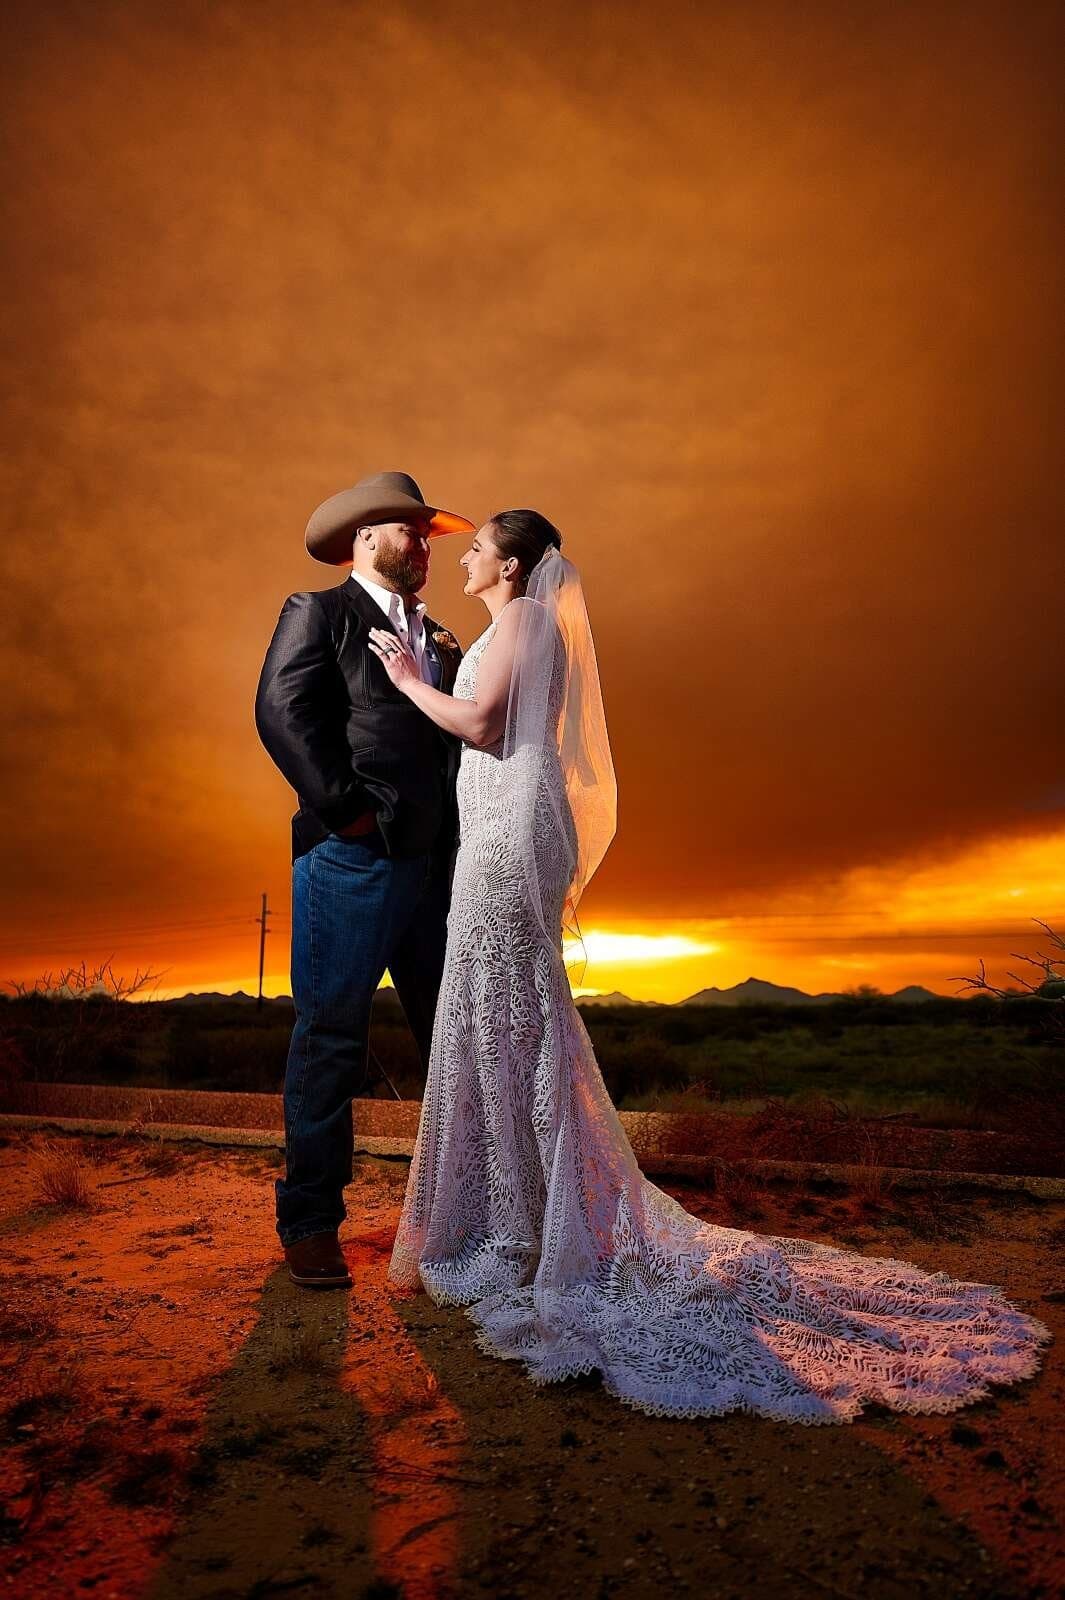 Andrew and Brittany's October Wedding at the Glover Ranch in Marana, Arizona